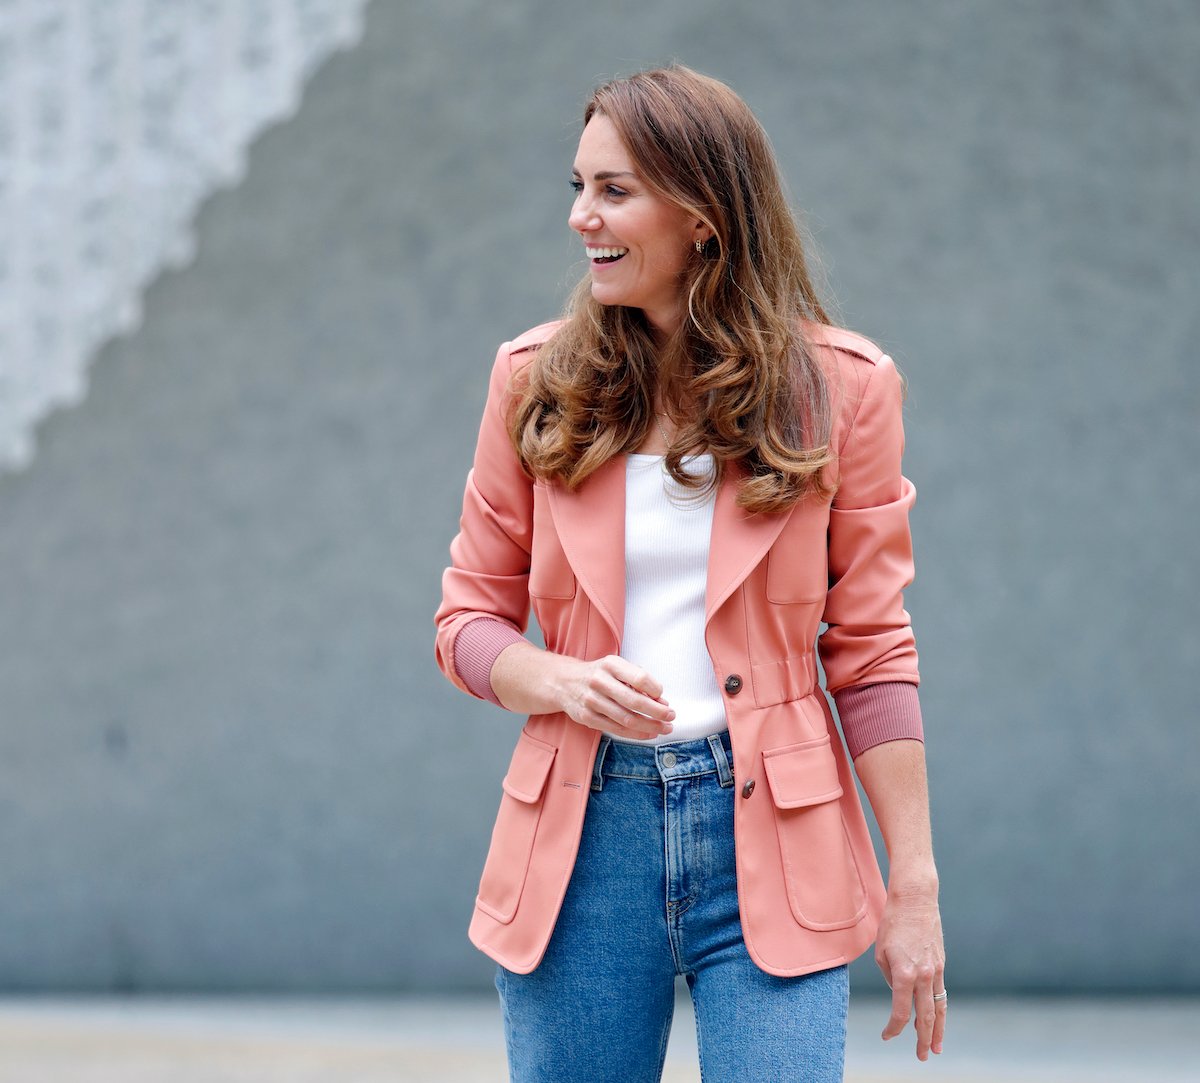 Kate Middleton laughing, turned to the right, wearing a pink blazer, white shirt, and high waisted jeans